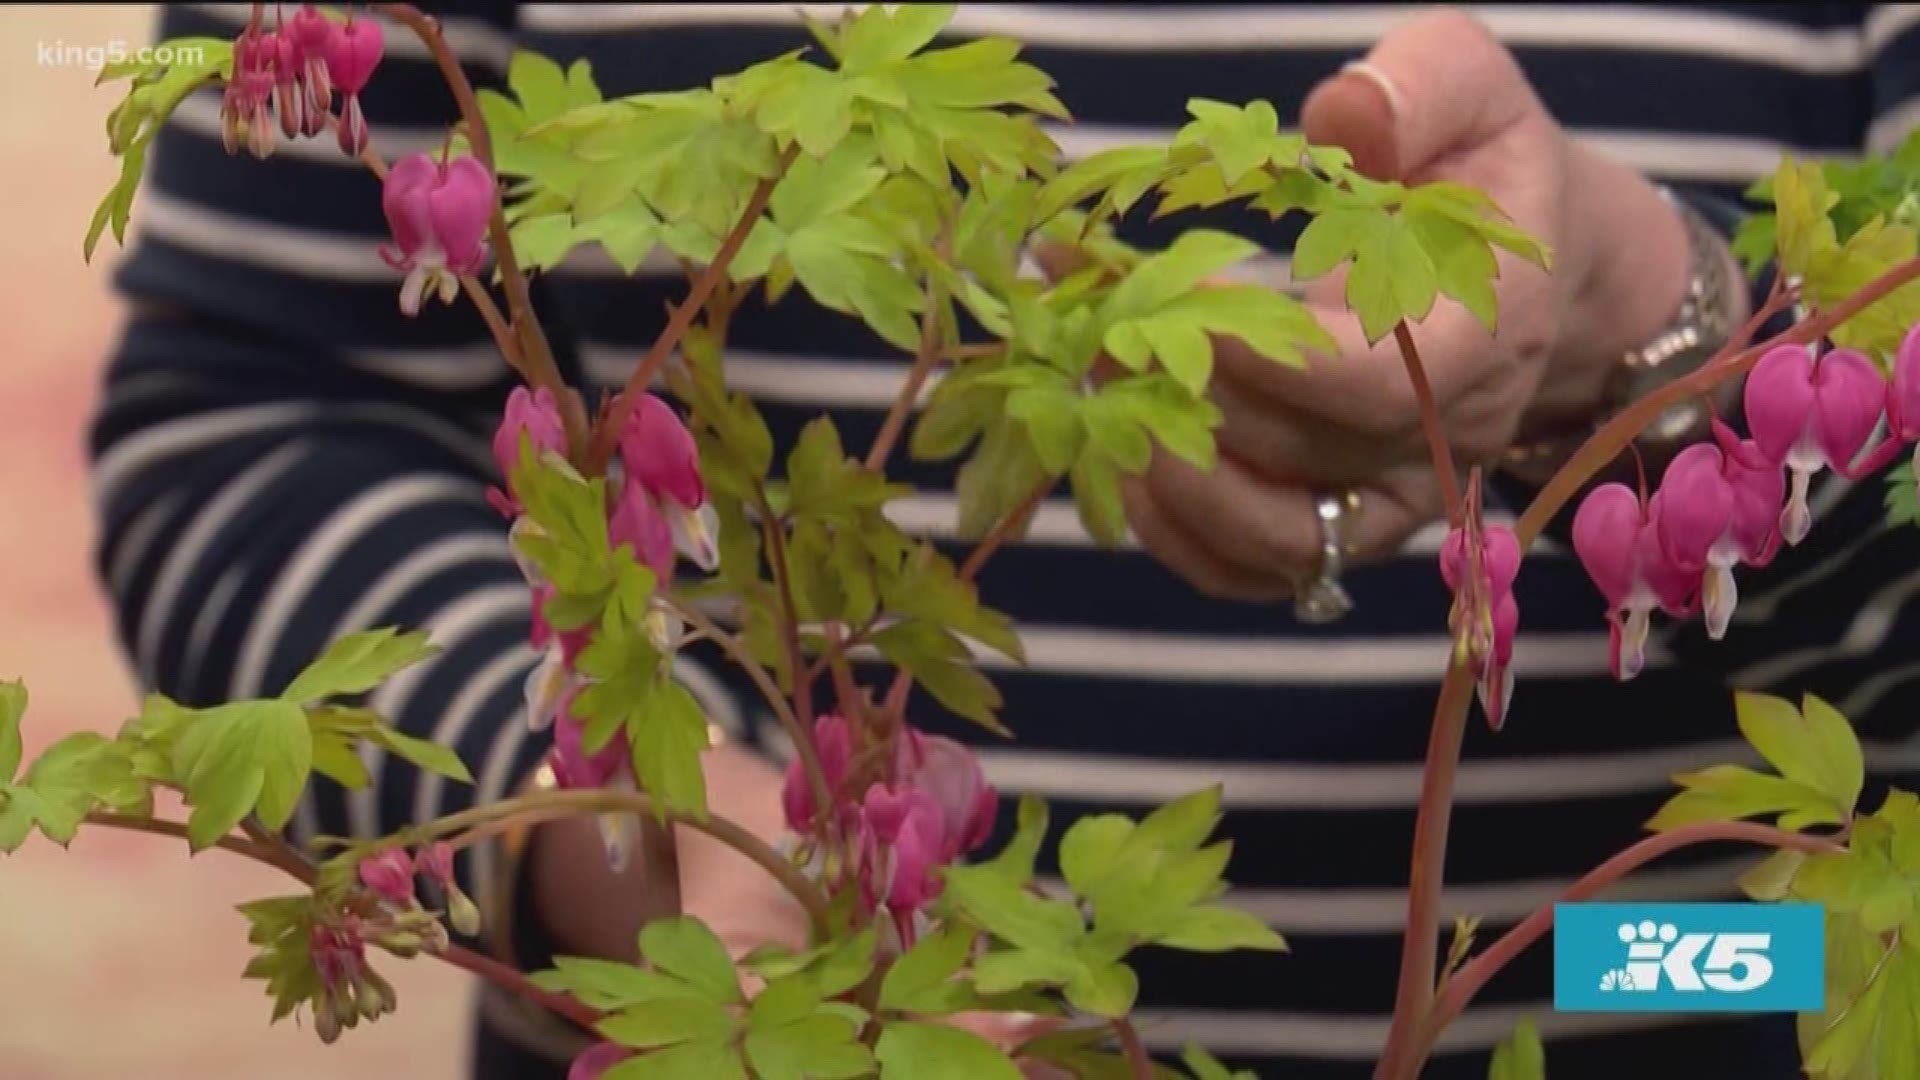 The Gardening Guru himself gives us need-to-know info on one of the most popular spring blooms.